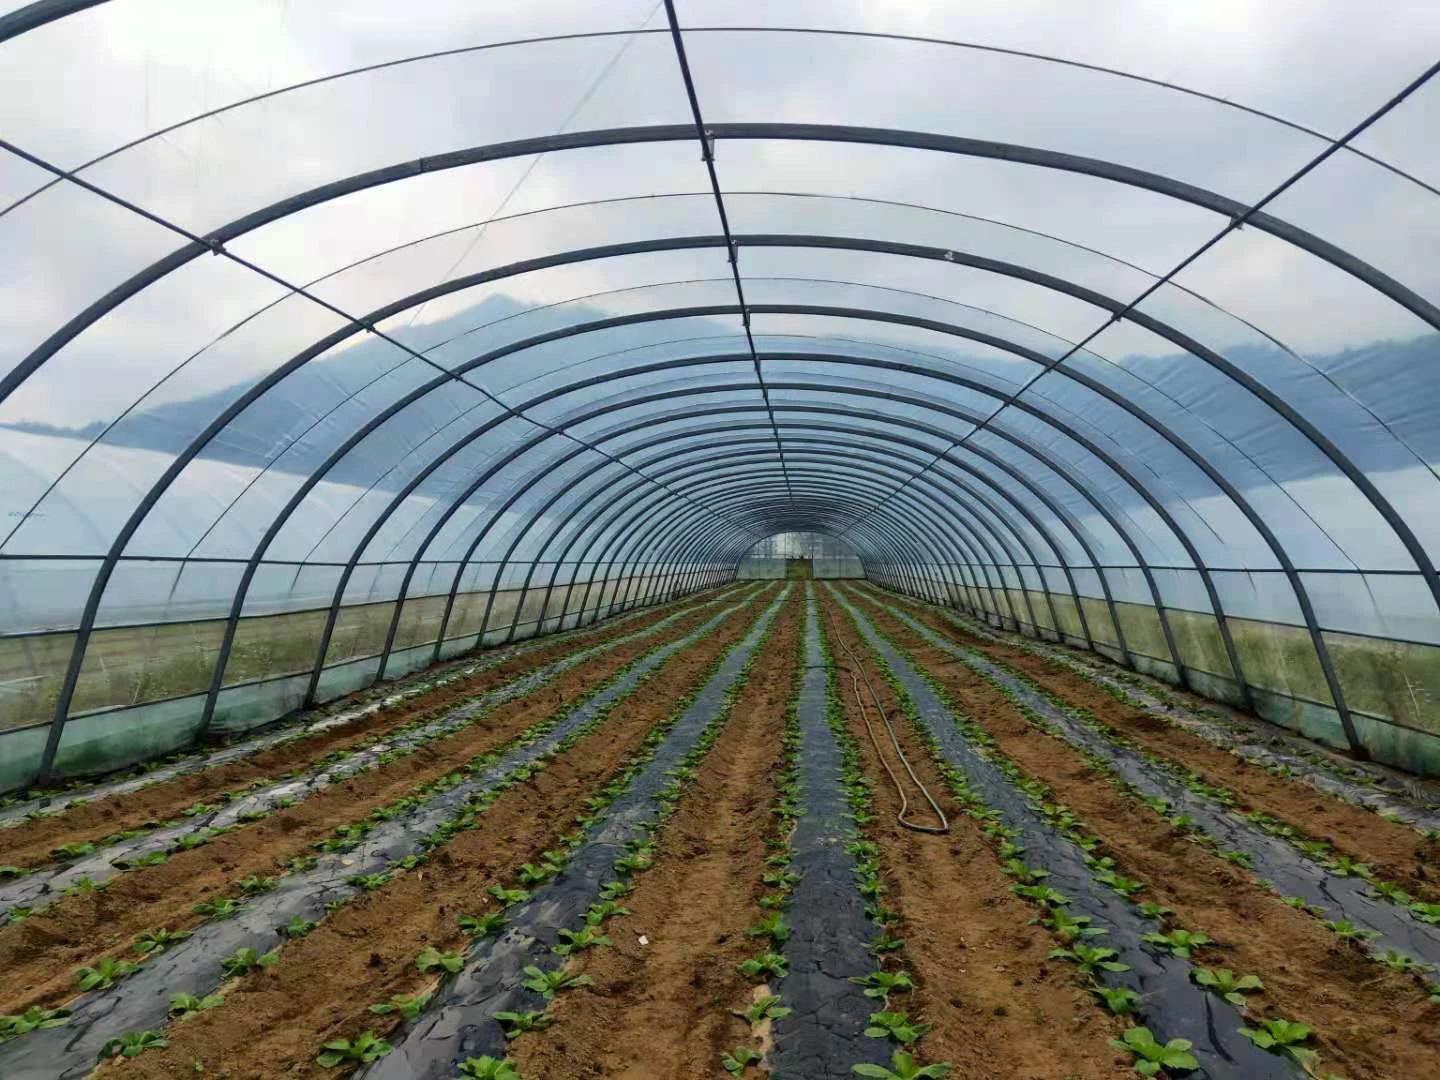 Sainpoly low cost agricultural greenhouse garden greenhouse multi-span plastic cover agricultural plastic film greenhouses